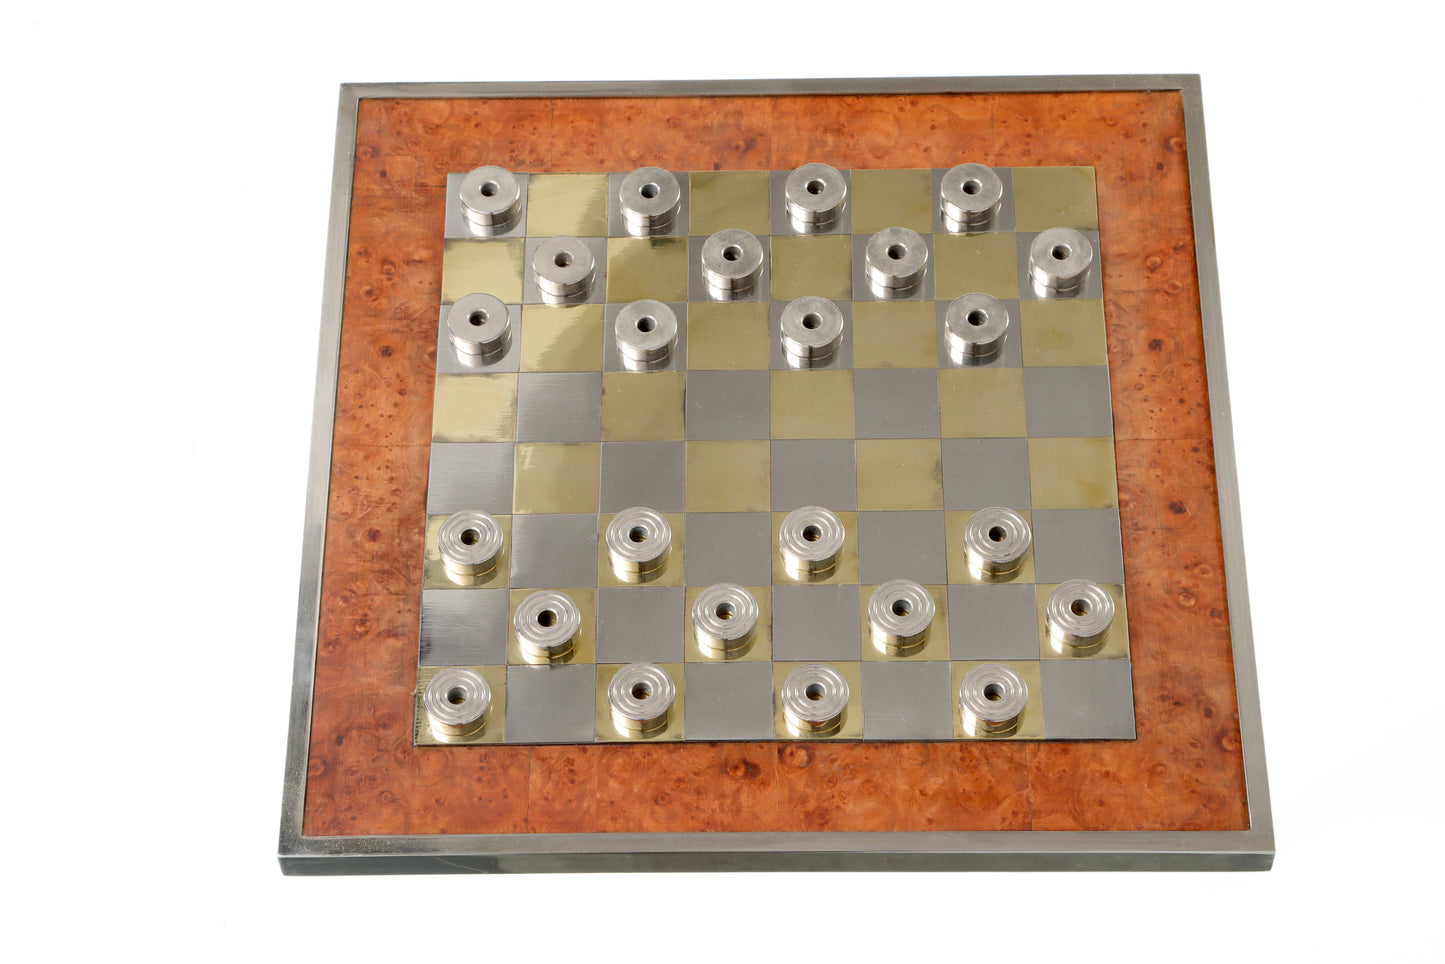 Chessboard from the 70s in briar